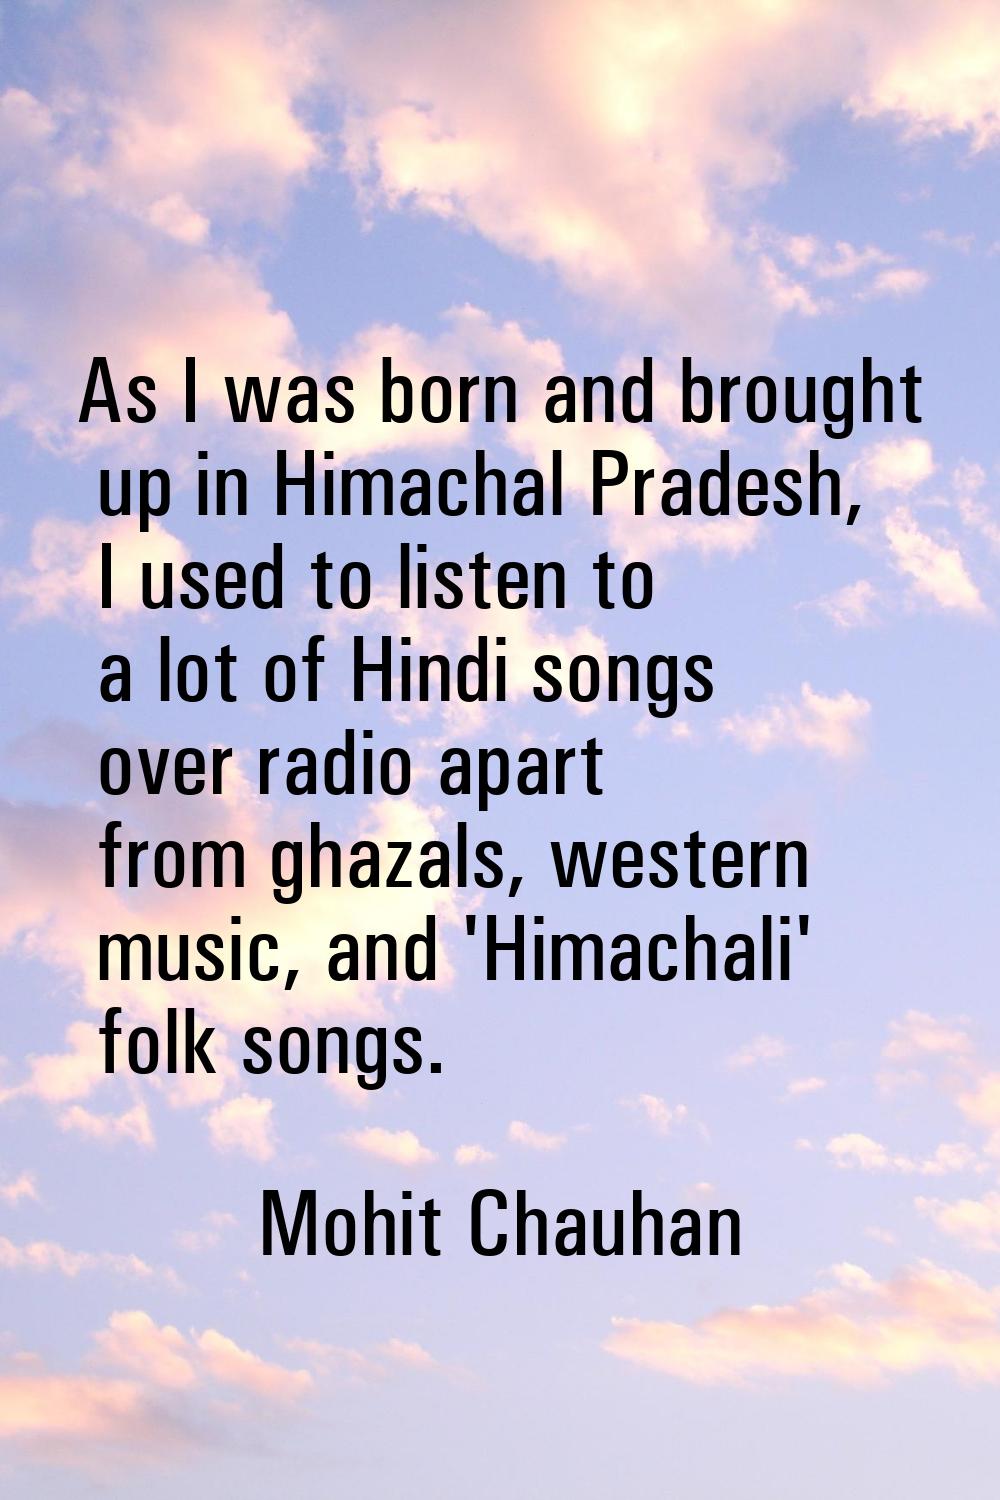 As I was born and brought up in Himachal Pradesh, I used to listen to a lot of Hindi songs over rad